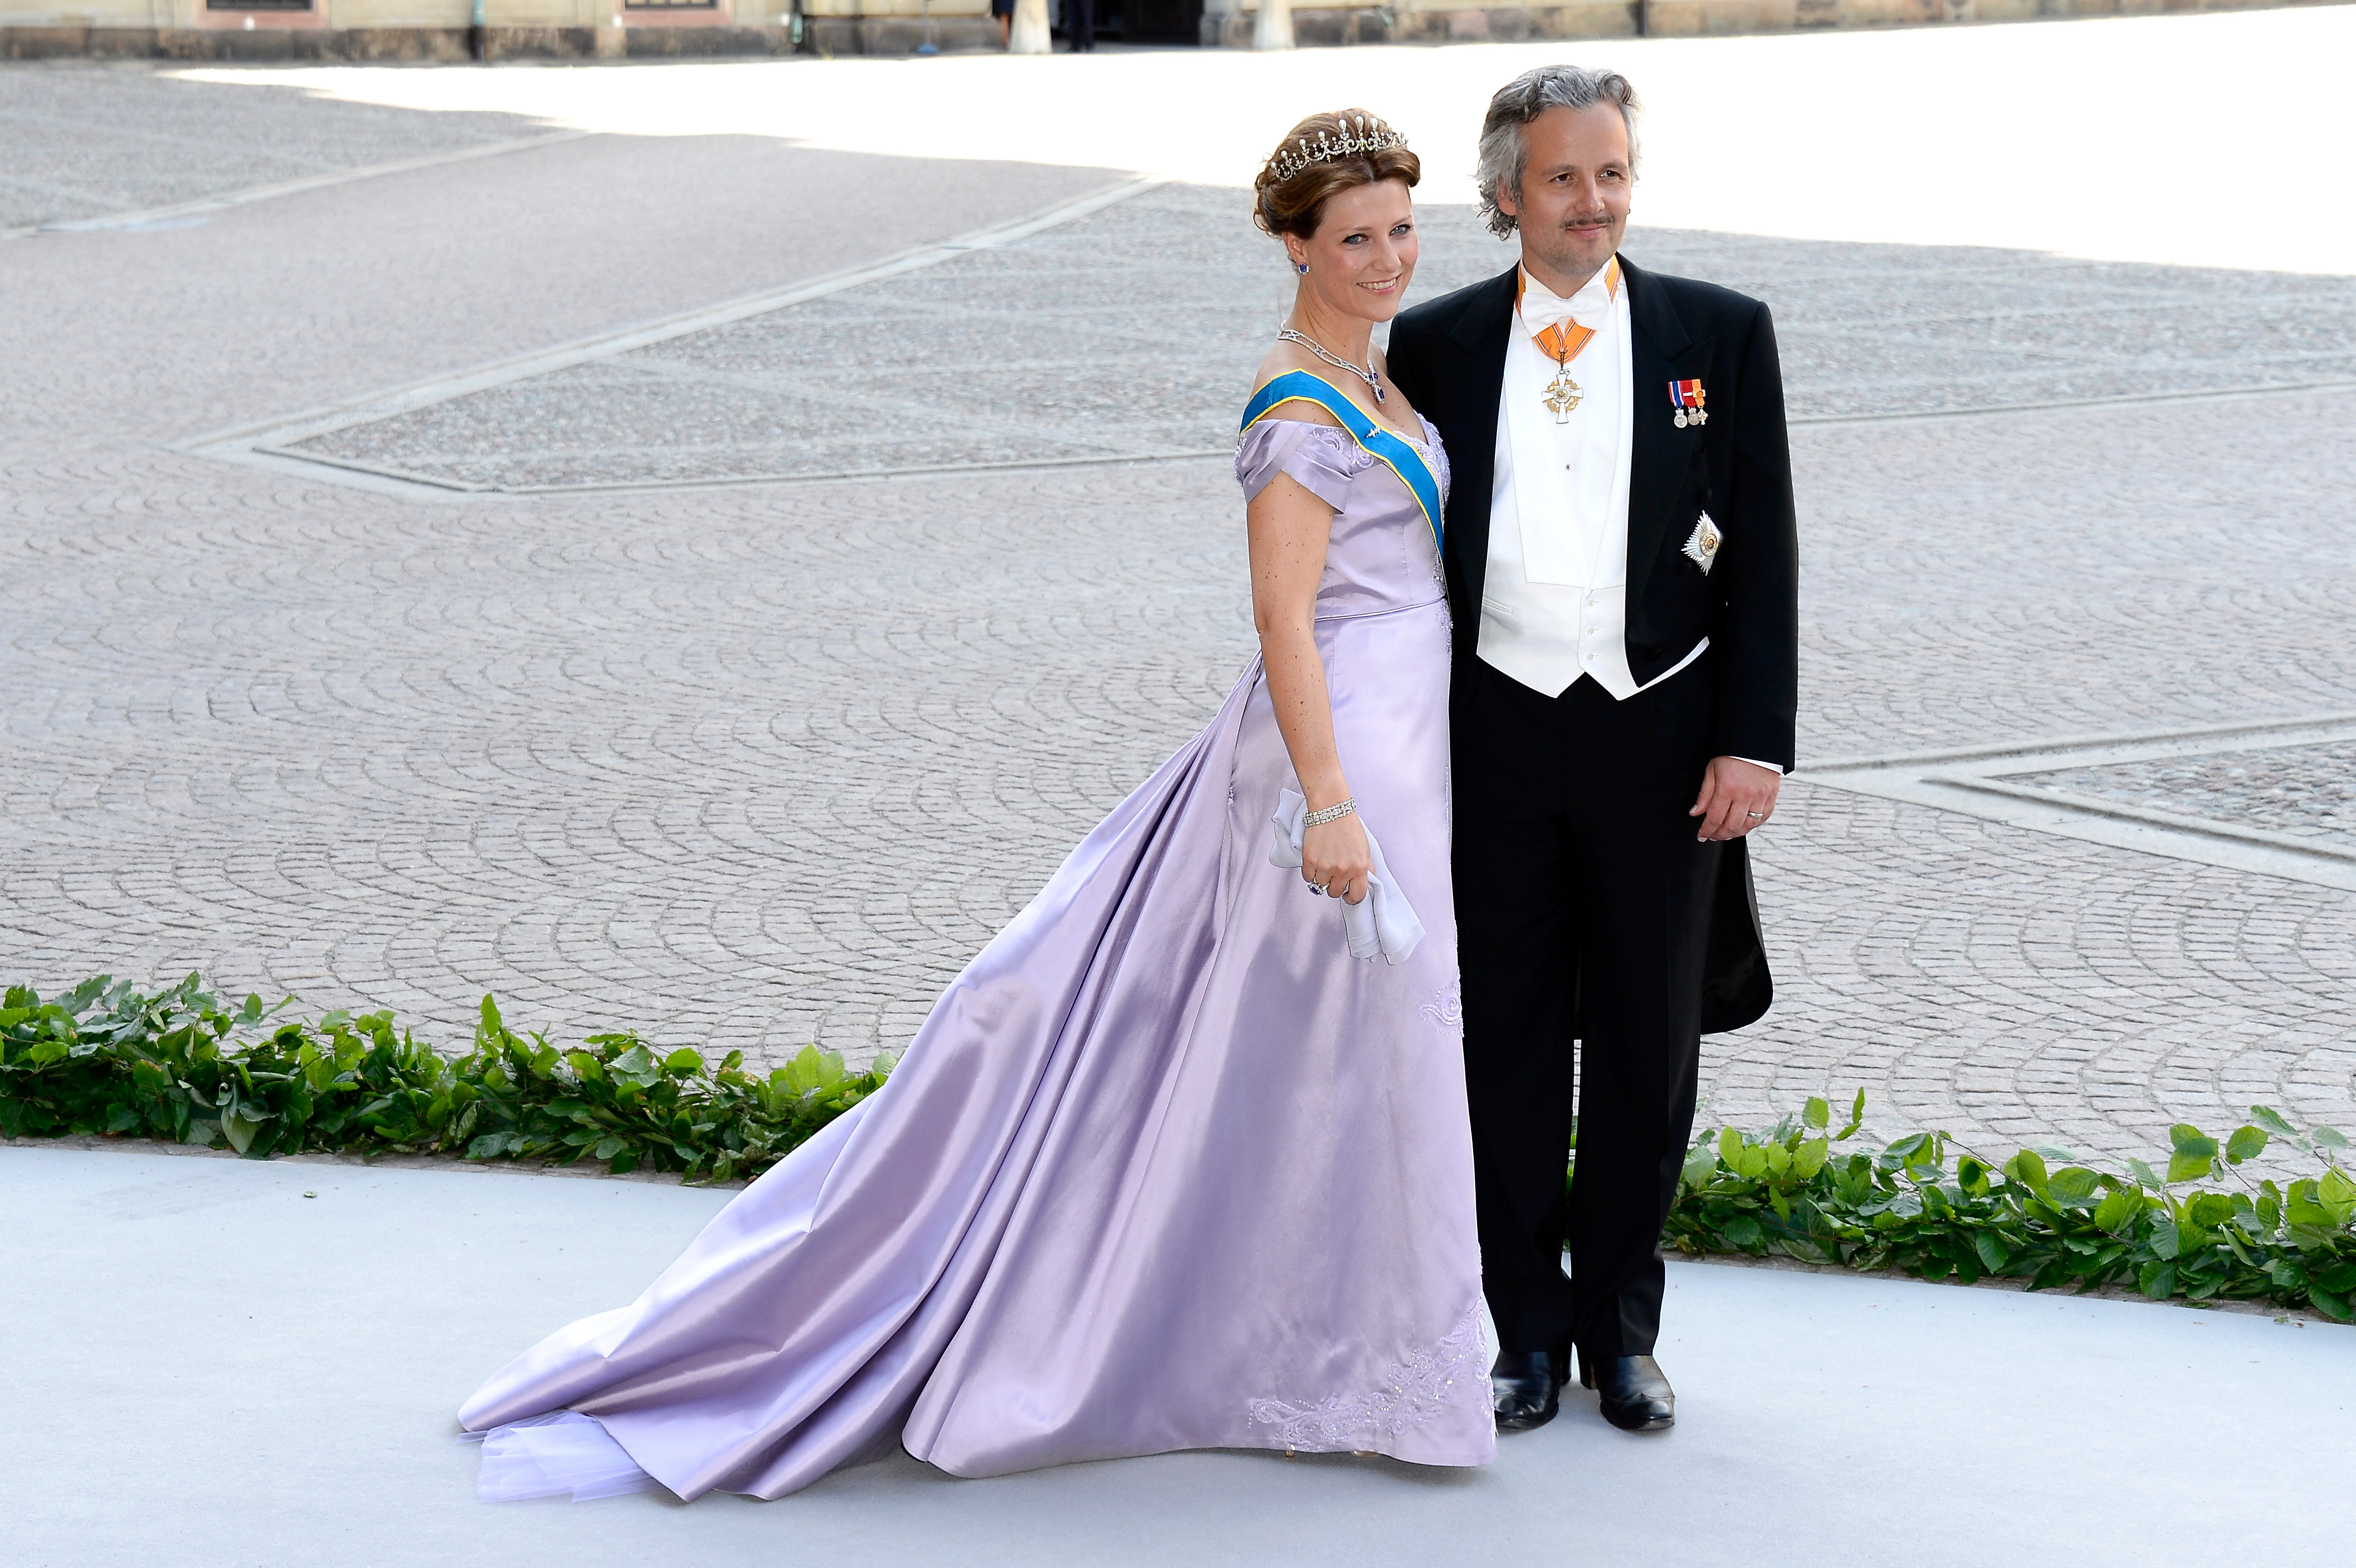 Princess Martha Louise of Norway and Ari Mikael Behn attend the wedding of Princess Madeleine of Sweden and Christopher O'Neill hosted by King Carl Gustaf XIV and Queen Silvia at The Royal Palace on June 8, 2013 in Stockholm, Sweden. (Pascal Le Segretain&mdash;Getty Images)